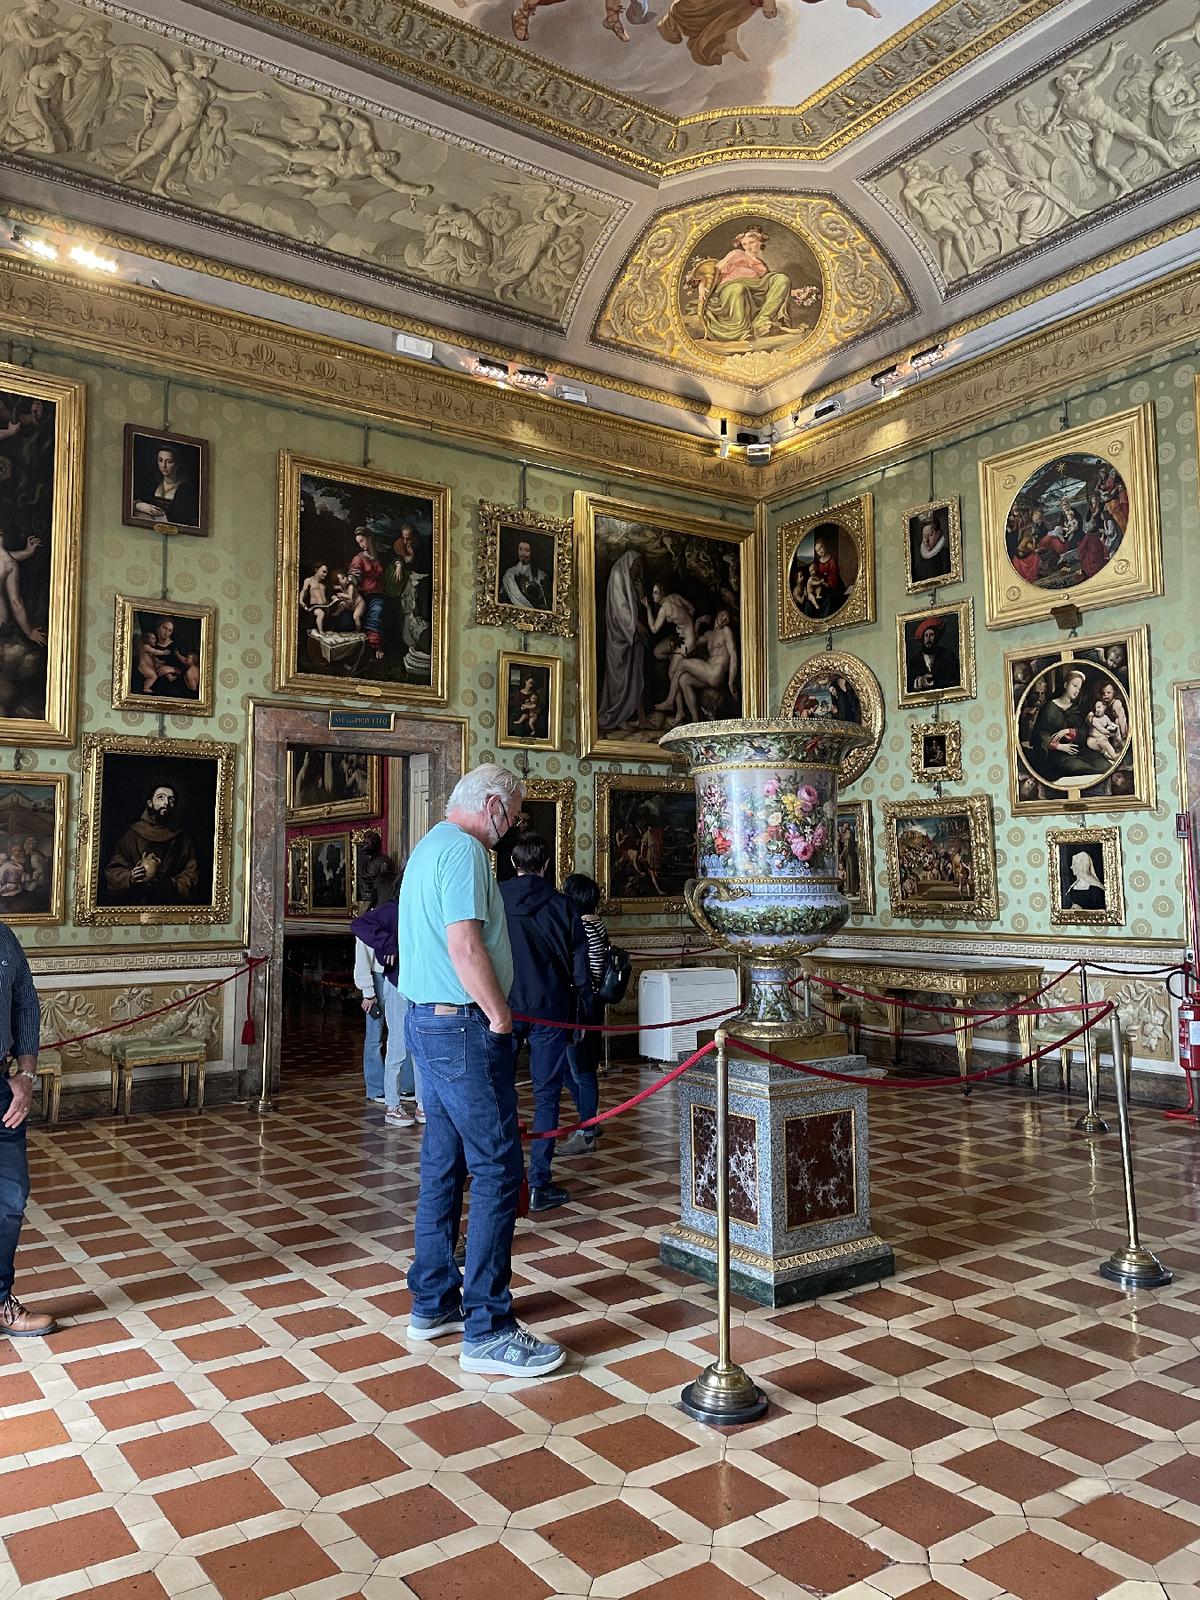 Myriad works of art captivate visitors at the opulent and well-organized Pitti Palace in Florence, Italy. (Photo courtesy of Lesley Sauls Frederikson.)